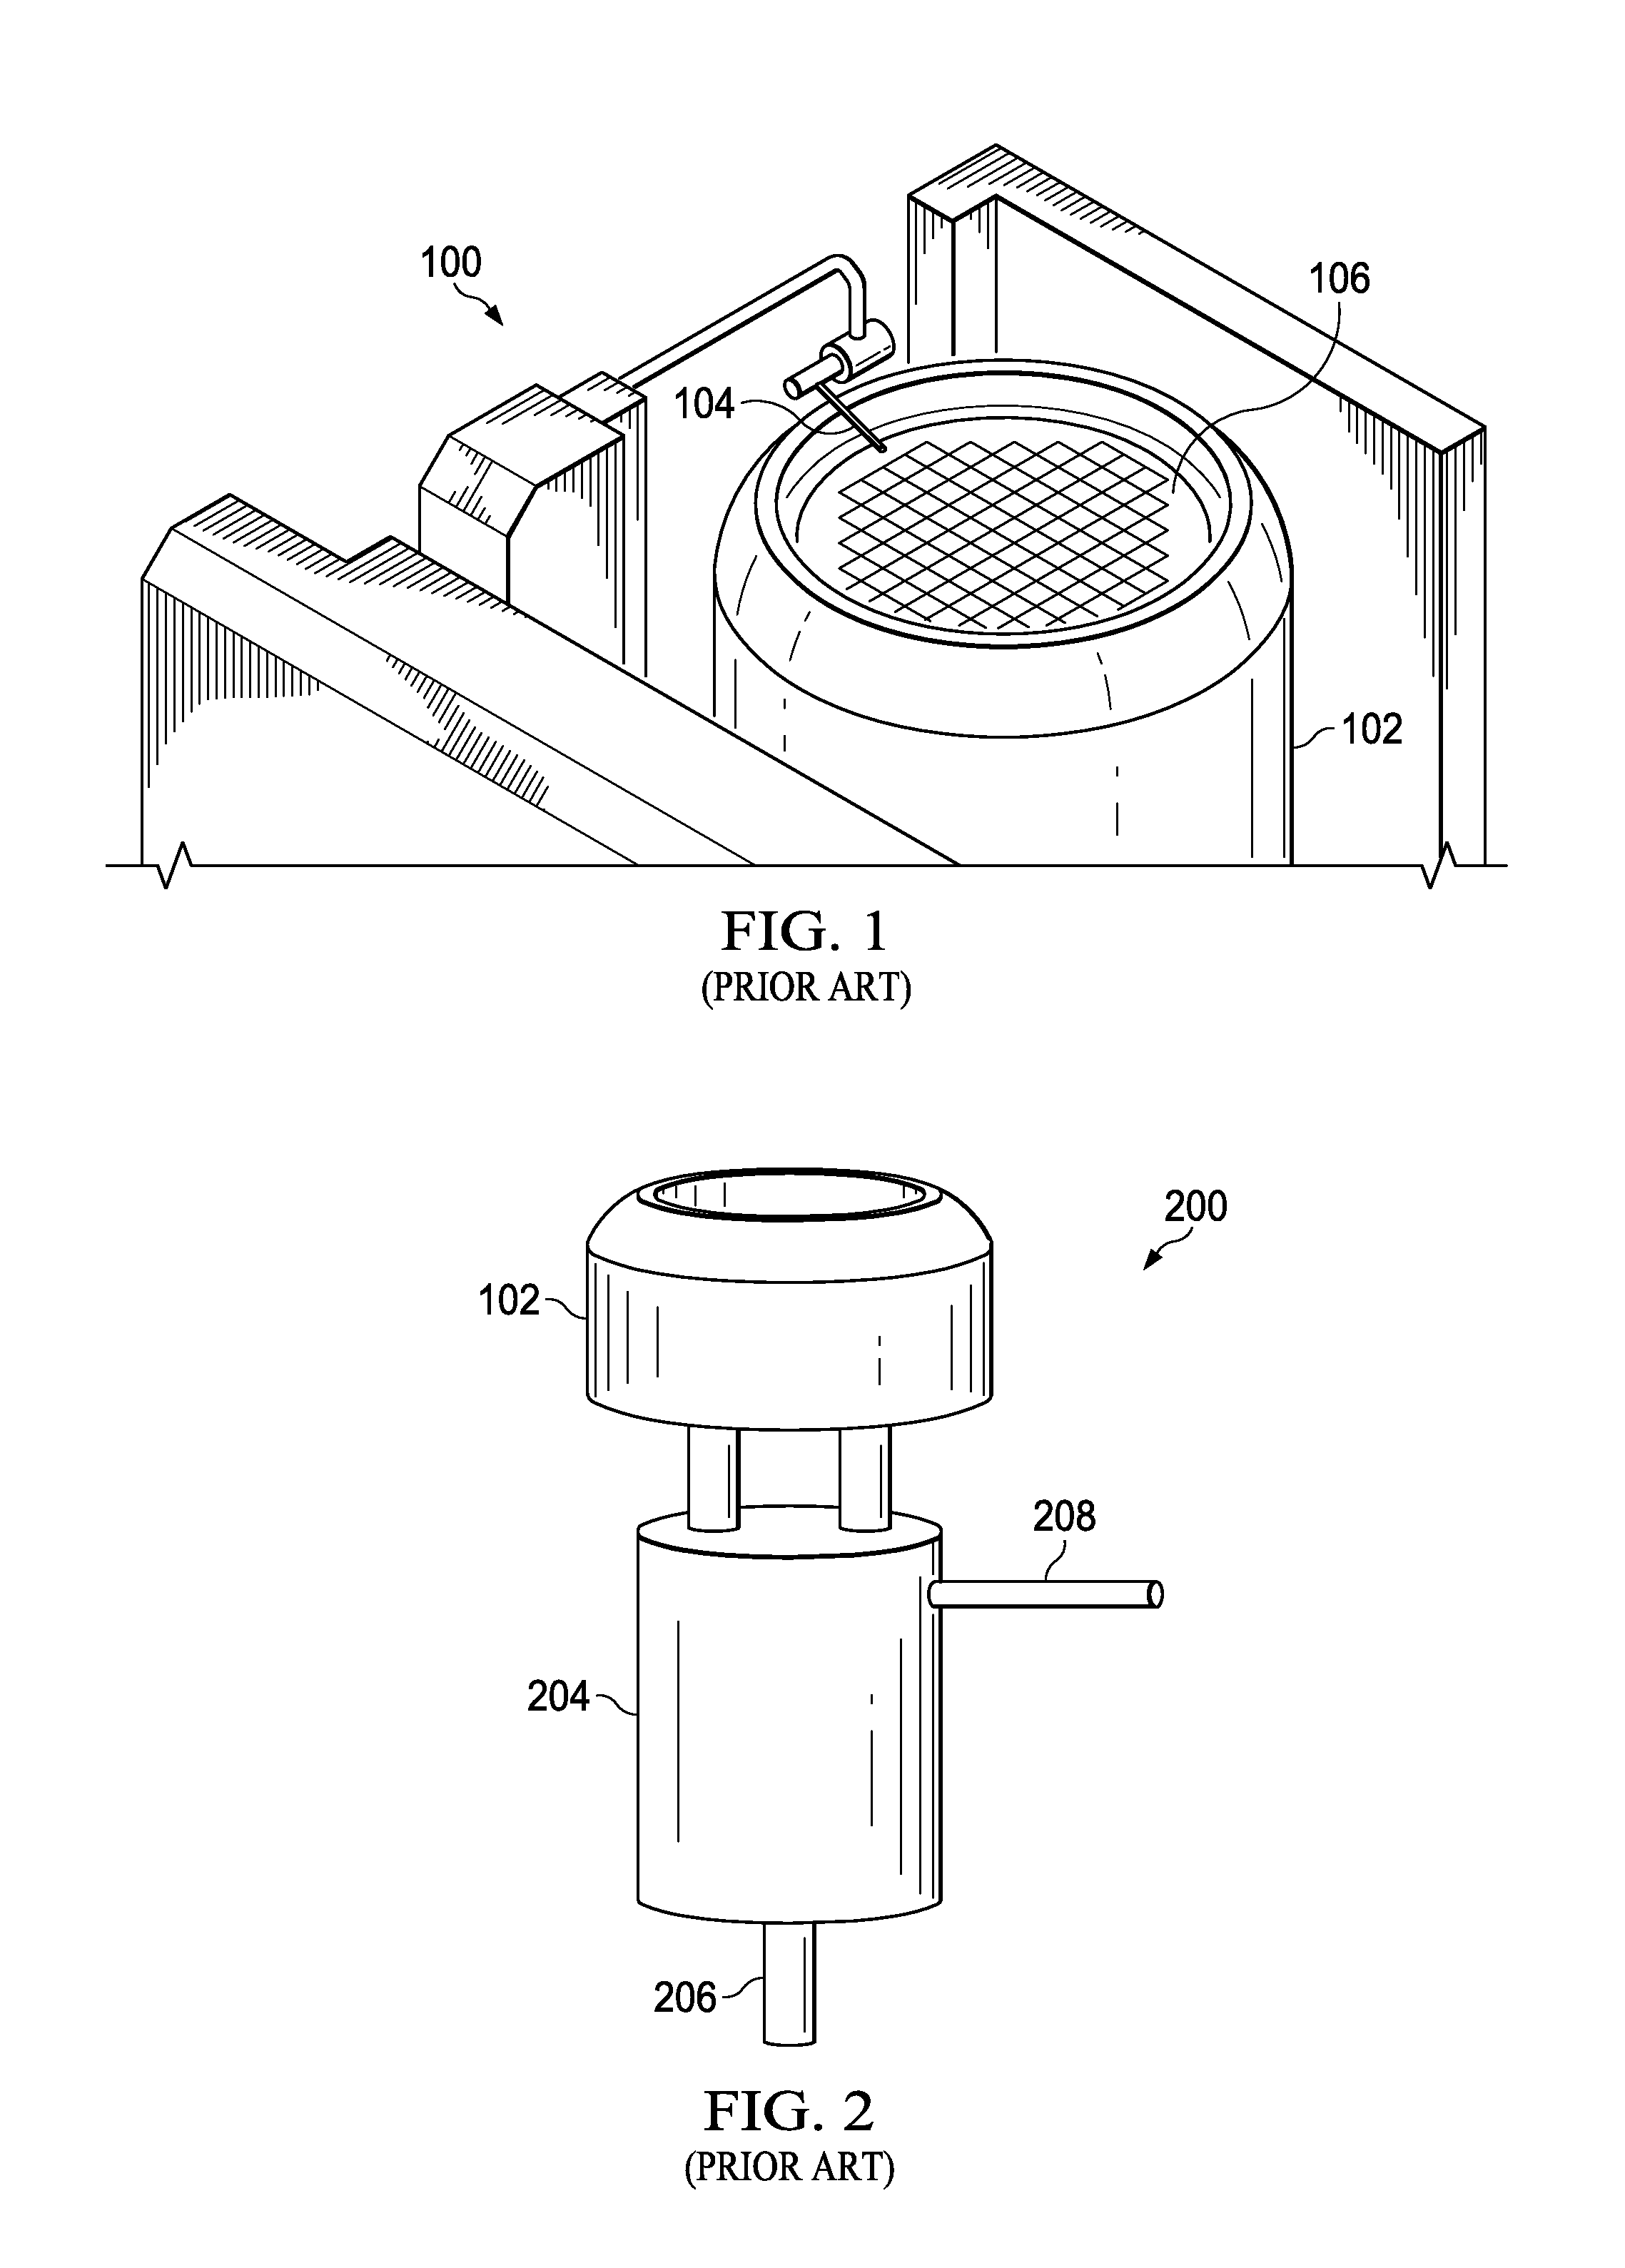 Process for forming PZT or PLZT thinfilms with low defectivity